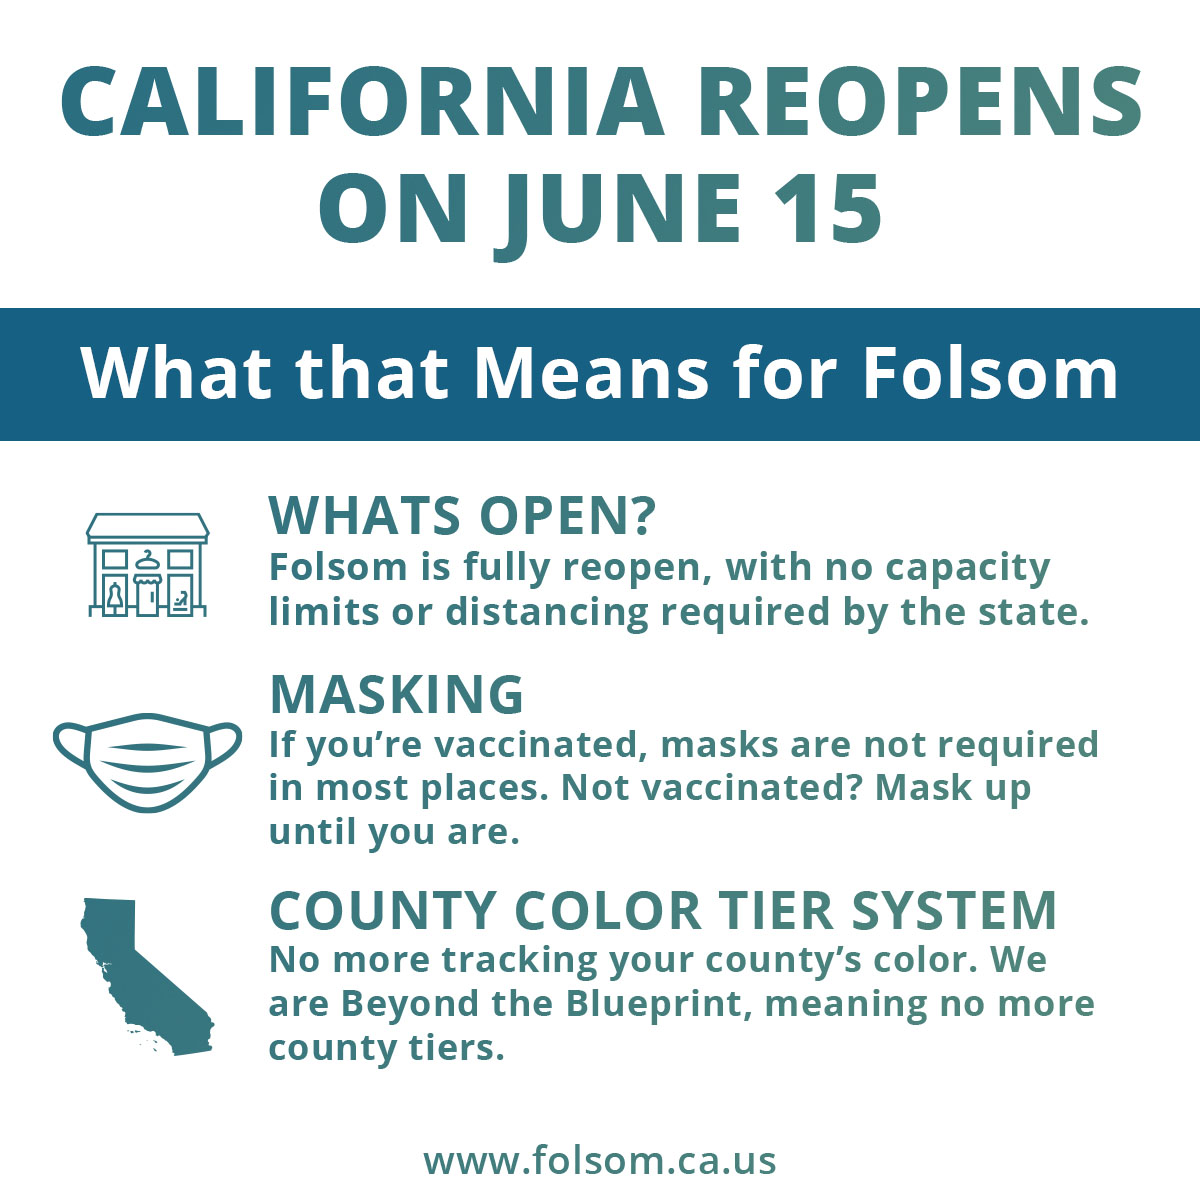 California Reopens on June 15 graphic details on What's Open?, Masking, and County Color Tier System with a folsom website URL at the bottom